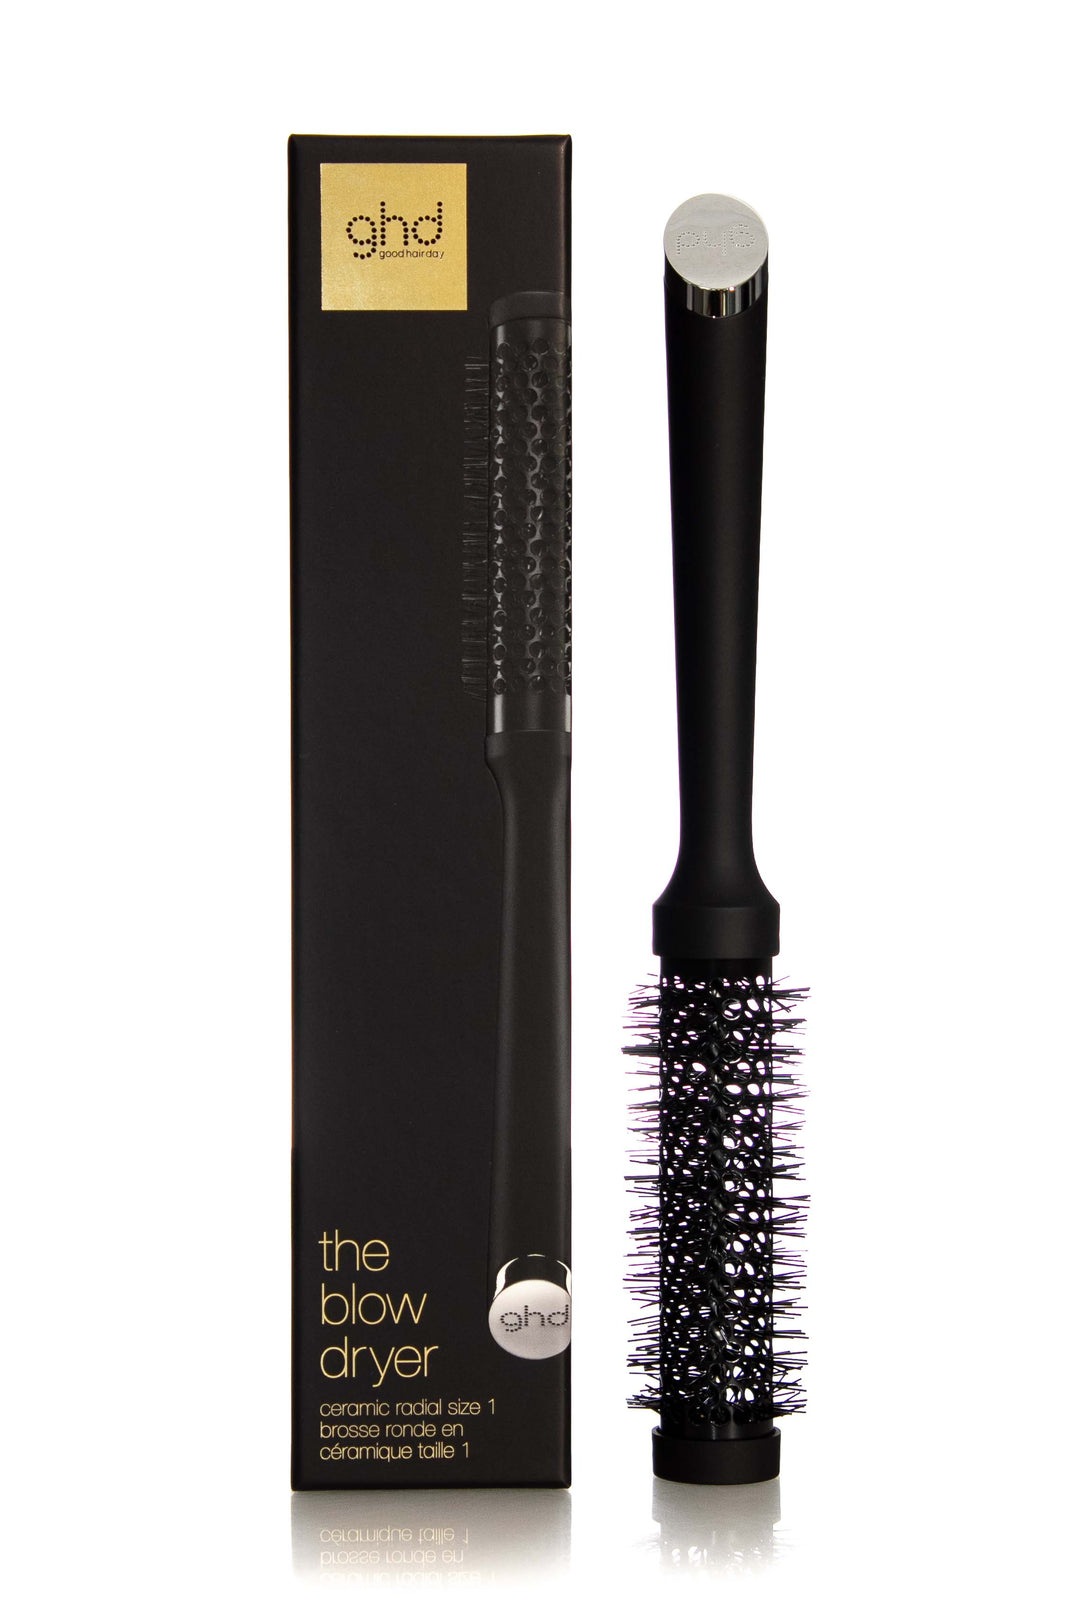 GHD THE BLOW DRYER CERAMIC RADIAL BRUSH SIZE 1